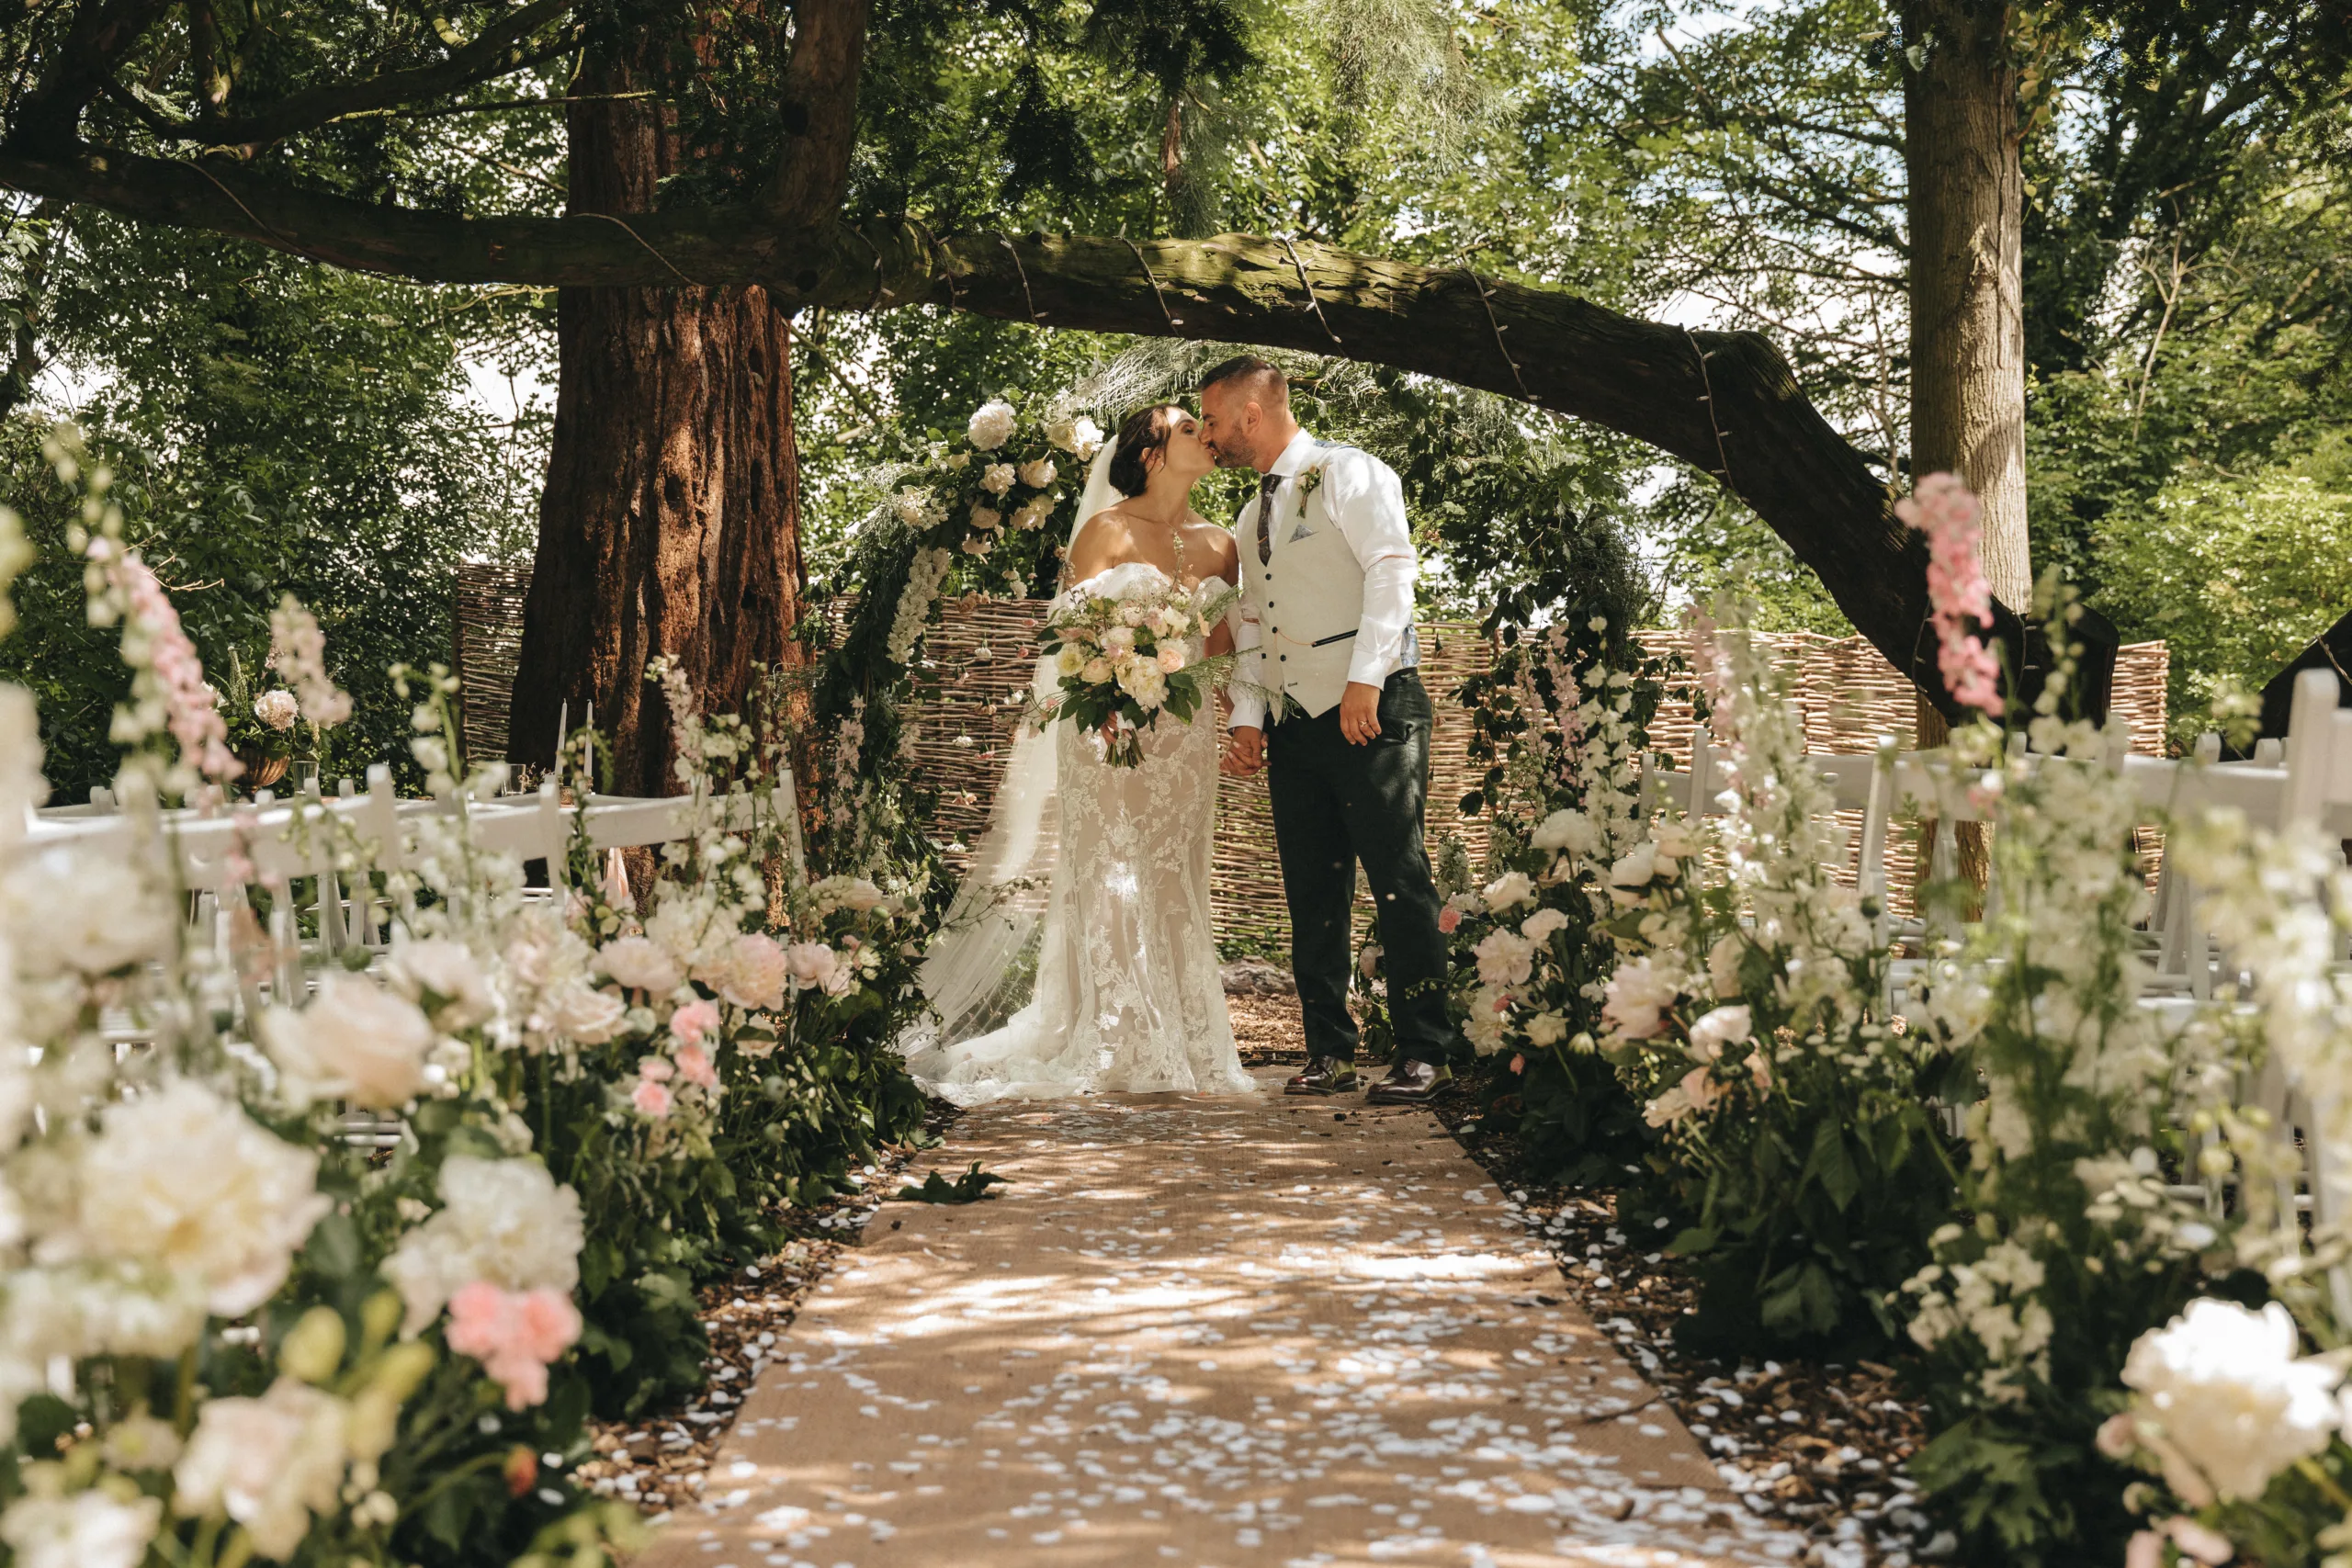 A bride and groom kissing under a tree in a garden, captured by a photographer.